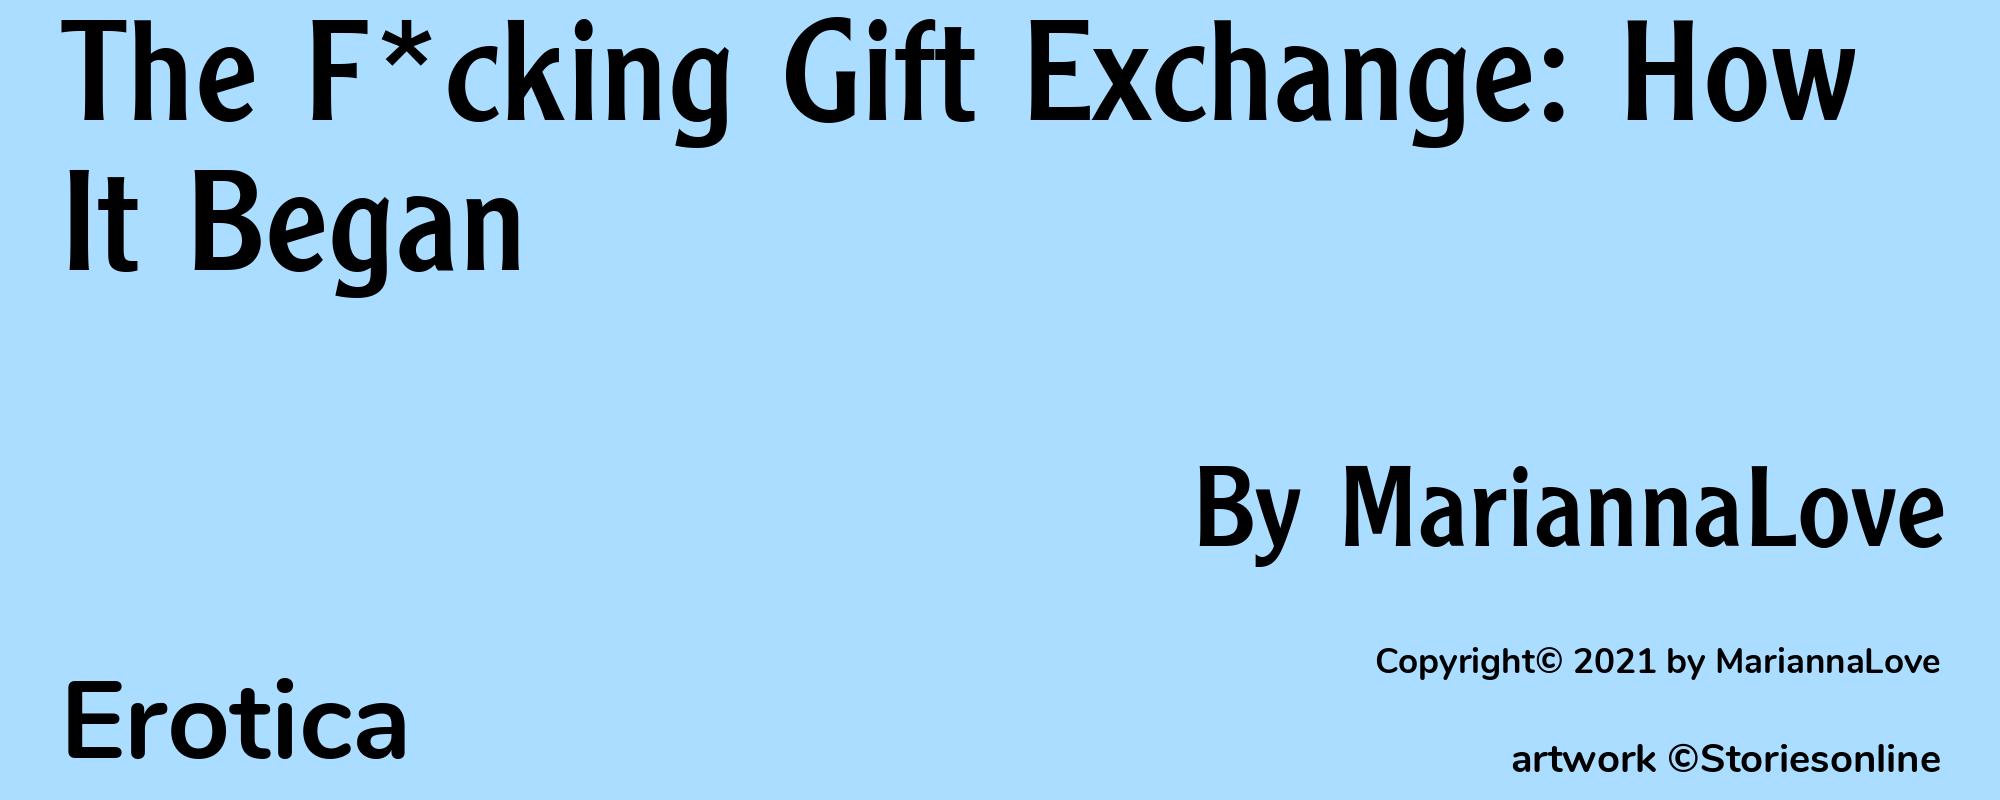 The F*cking Gift Exchange: How It Began - Cover